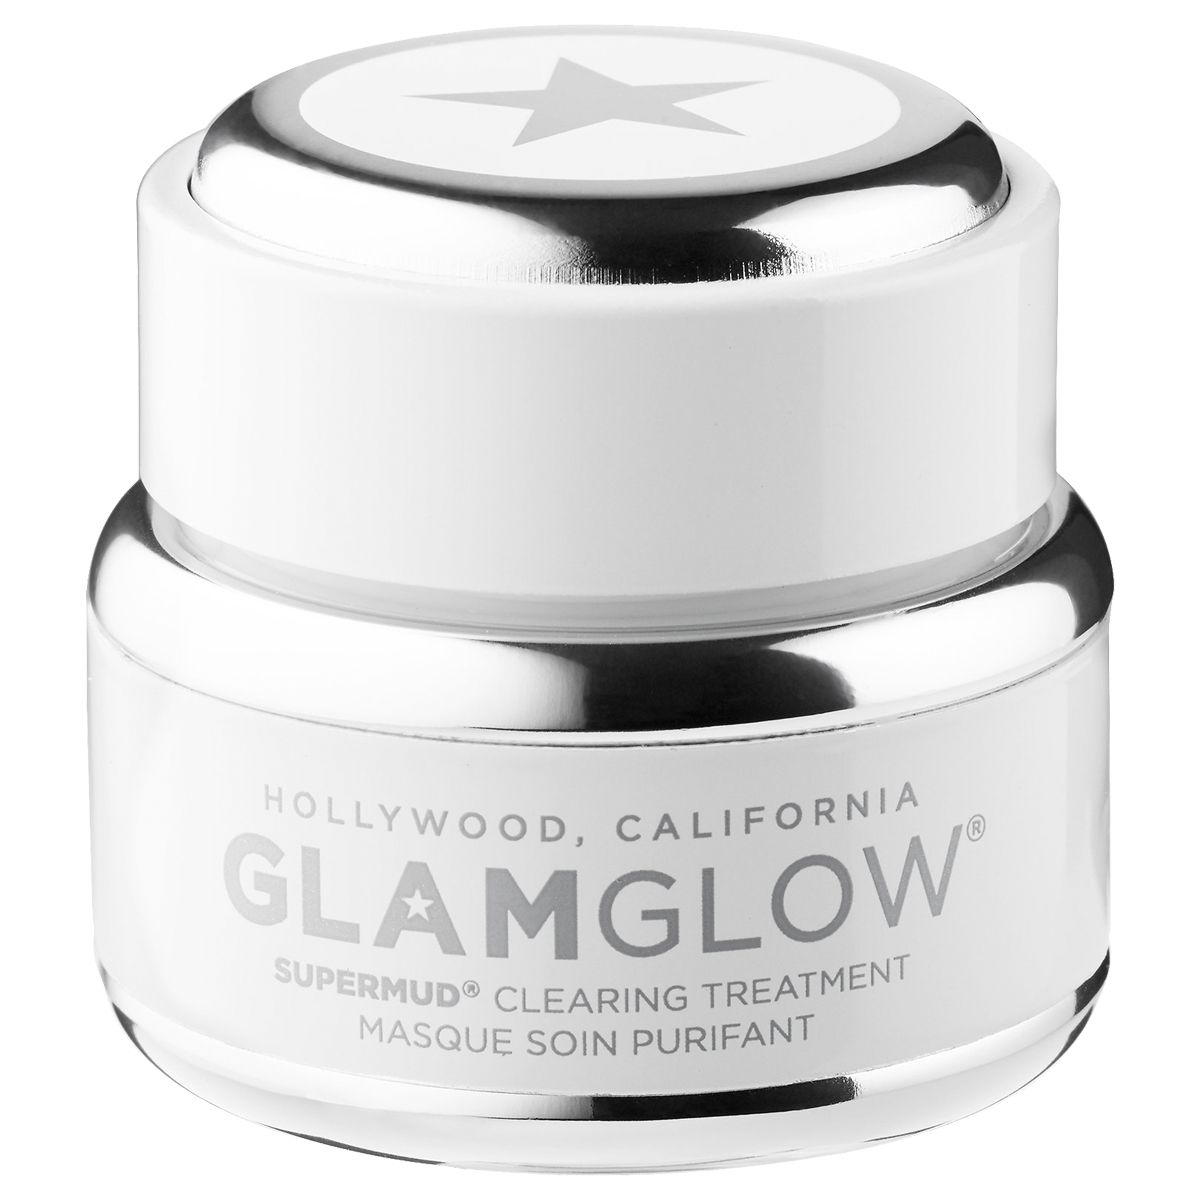 GLAMGLOW SUPERMUD Clearing Treatment